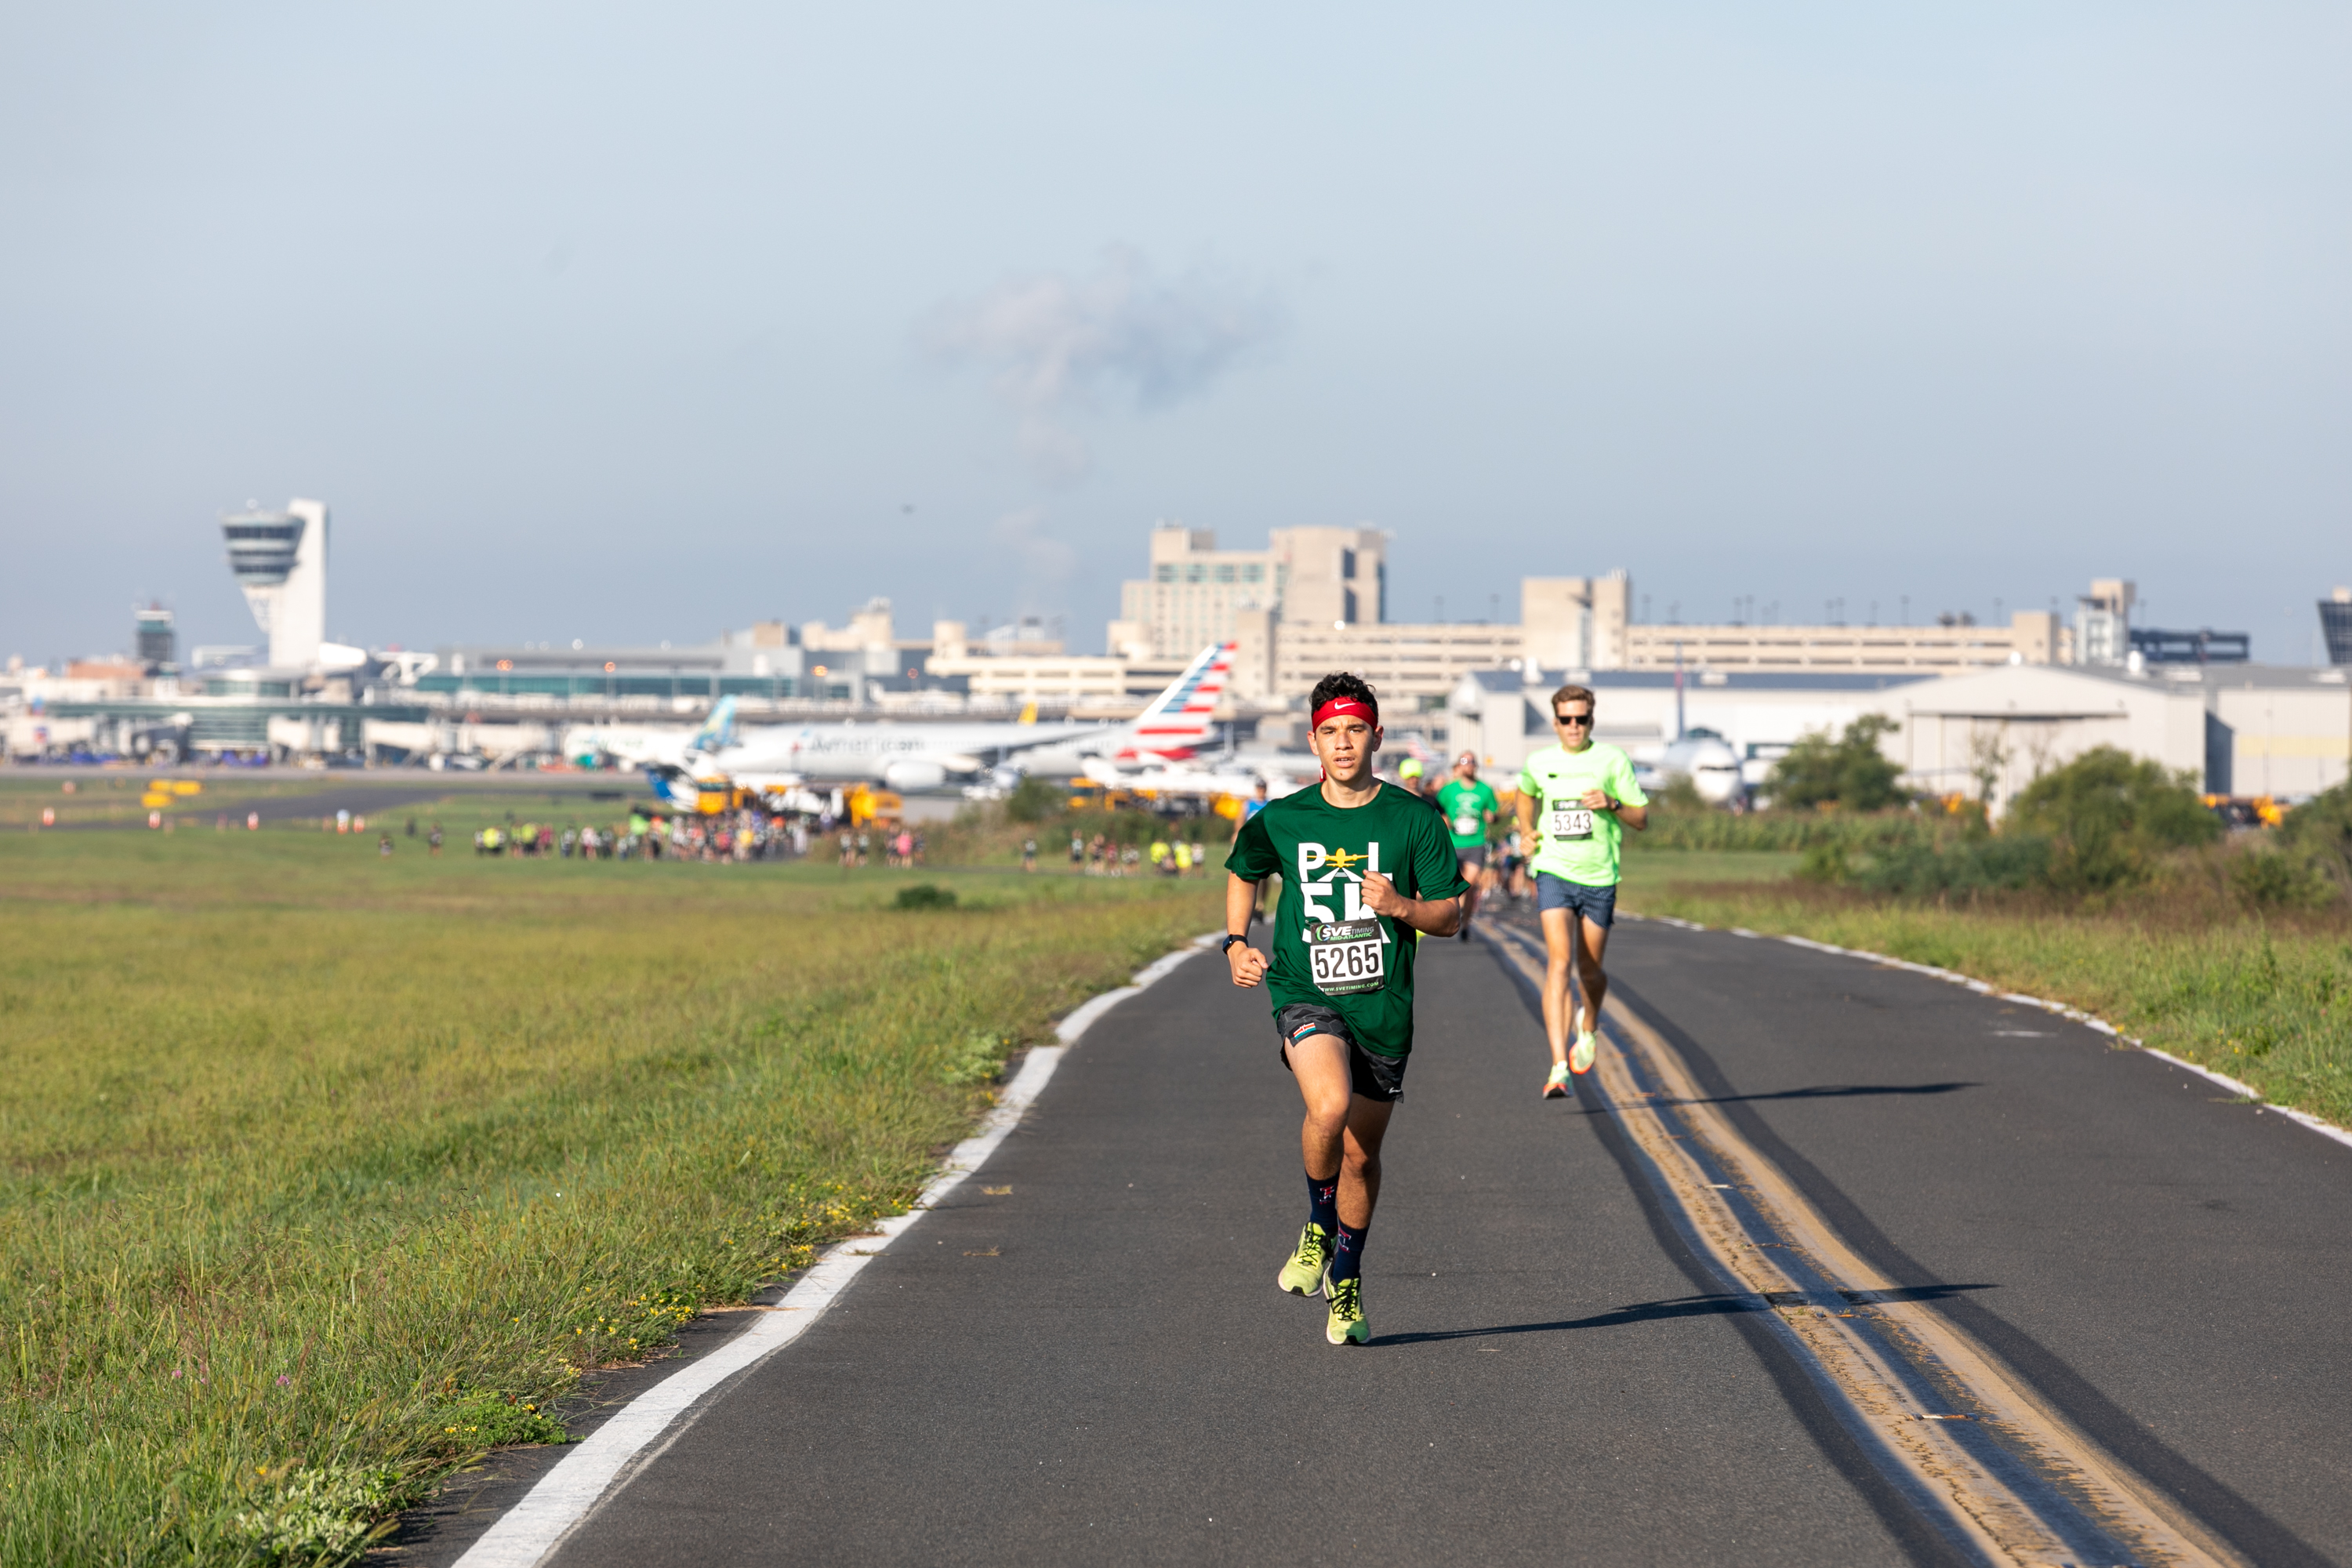 Participants running on runway with planes in background